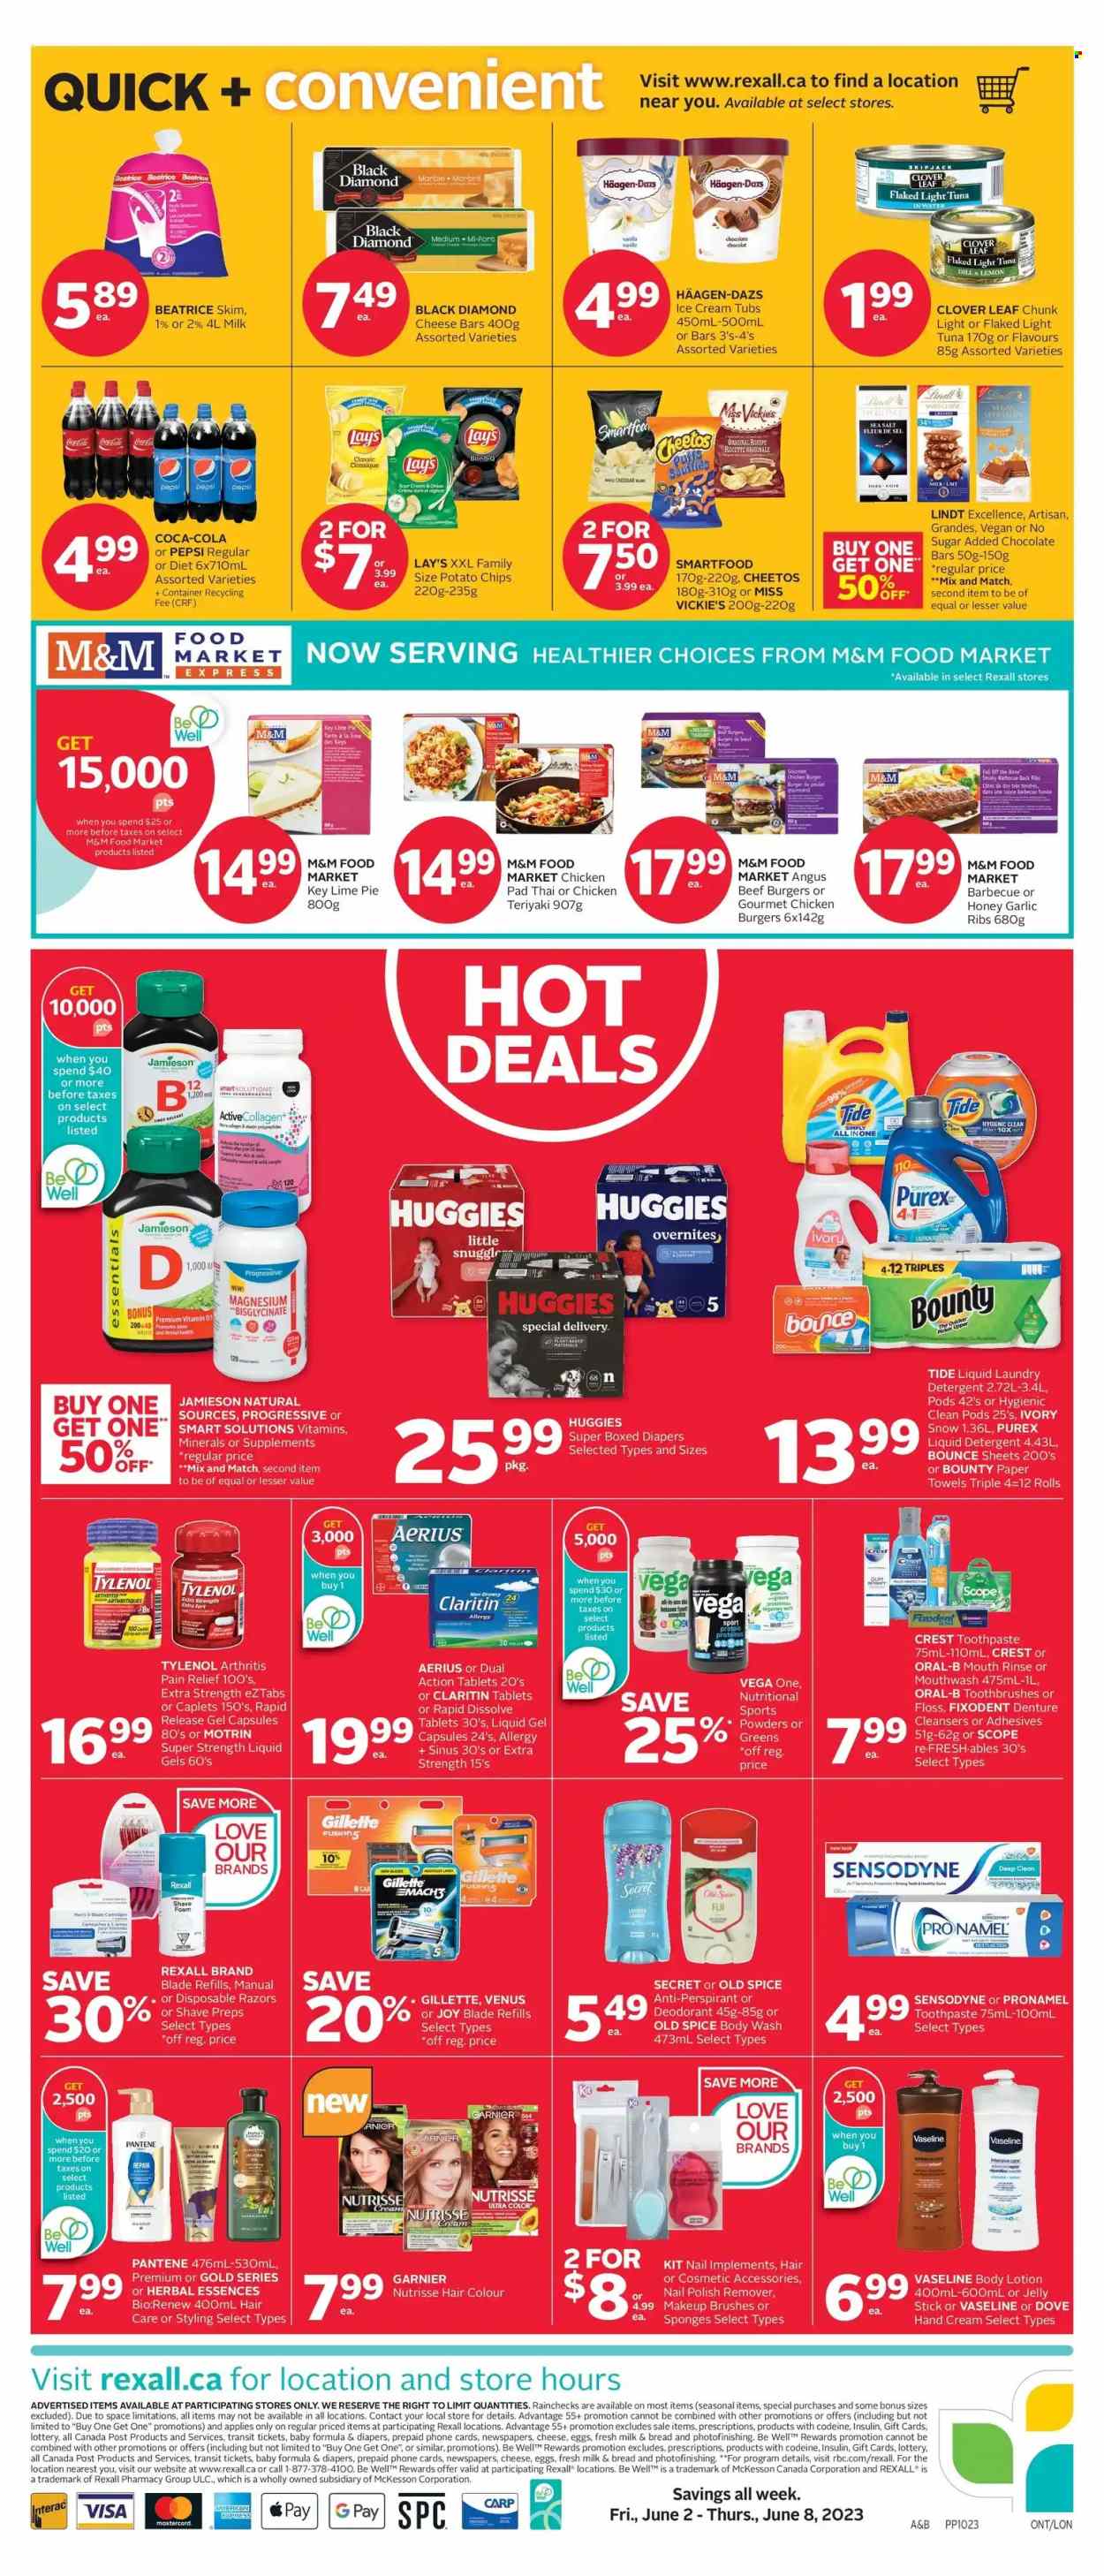 thumbnail - Rexall Flyer - June 02, 2023 - June 08, 2023 - Sales products - bread, eggs, Dove, chocolate, Bounty, Santa, chocolate bar, potato chips, Cheetos, chips, Lay’s, Smartfood, salty snack, garlic, tuna, tuna in water, light tuna, sauce, dill, Coca-Cola, Pepsi, soft drink, Clover, water, nappies, kitchen towels, paper towels, Tide, liquid detergent, laundry detergent, Bounce, Purex, body wash, Vaseline, toothpaste, mouthwash, Fixodent, Crest, Gillette, Pantene, hair color, Herbal Essences, body lotion, hand cream, anti-perspirant, Venus, disposable razor, shave foam, cosmetic accessory, nail polish remover, makeup, container, pain relief, magnesium, Tylenol, vitamin D3, Motrin, Claritin, detergent, Garnier, Huggies, Old Spice, Oral-B, Sensodyne, Lindt, M&M's, deodorant. Page 10.